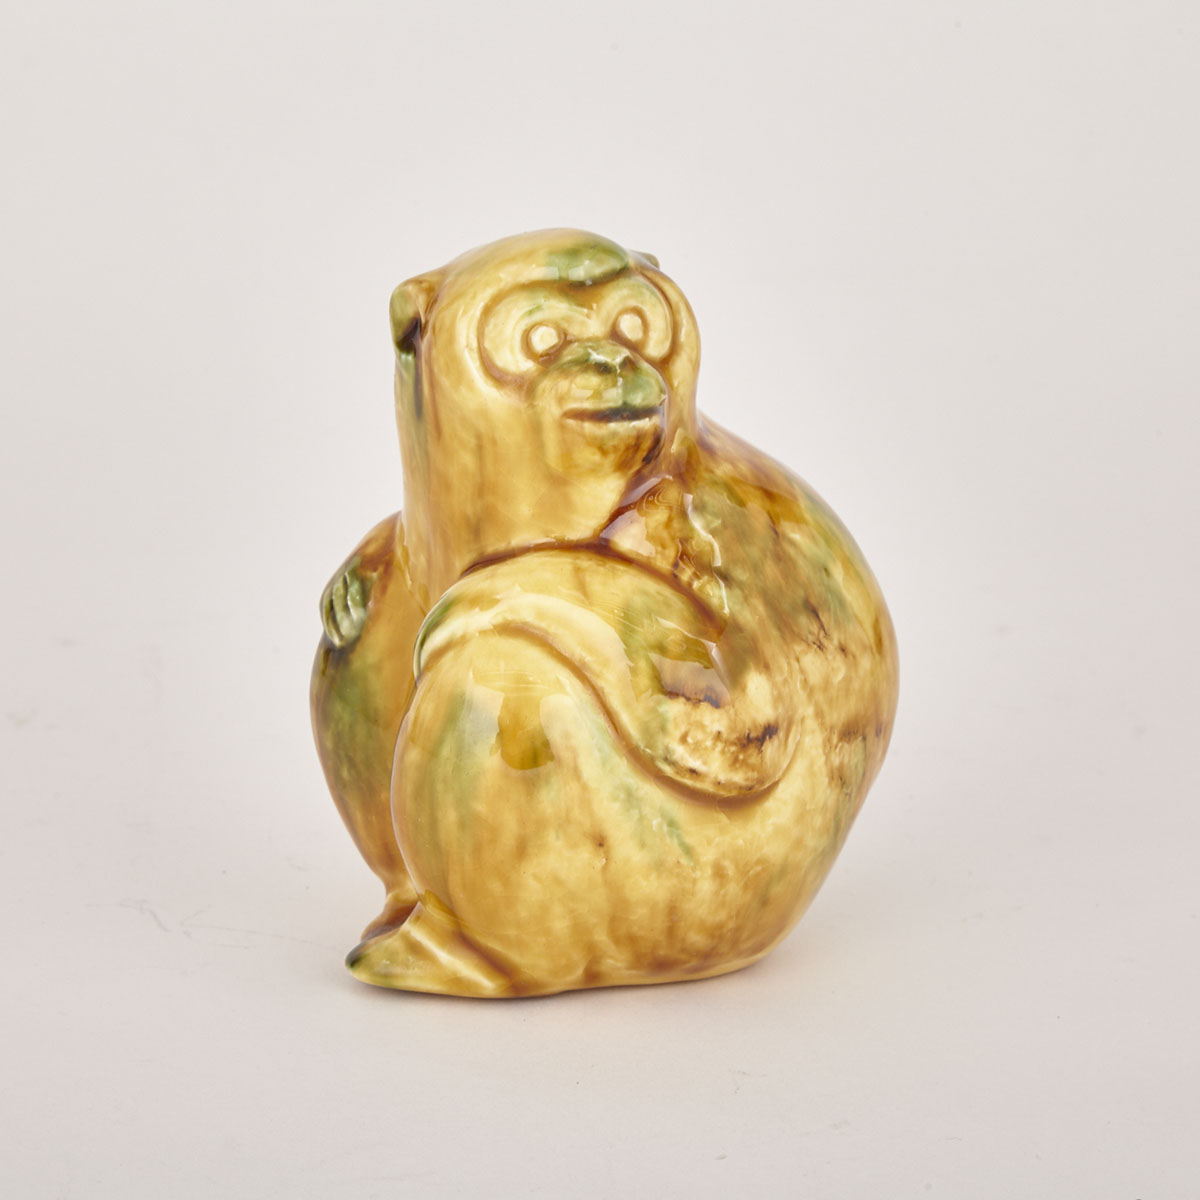 Japanese Spinach and Egg Glazed Pottery Monkey, mid 20th century